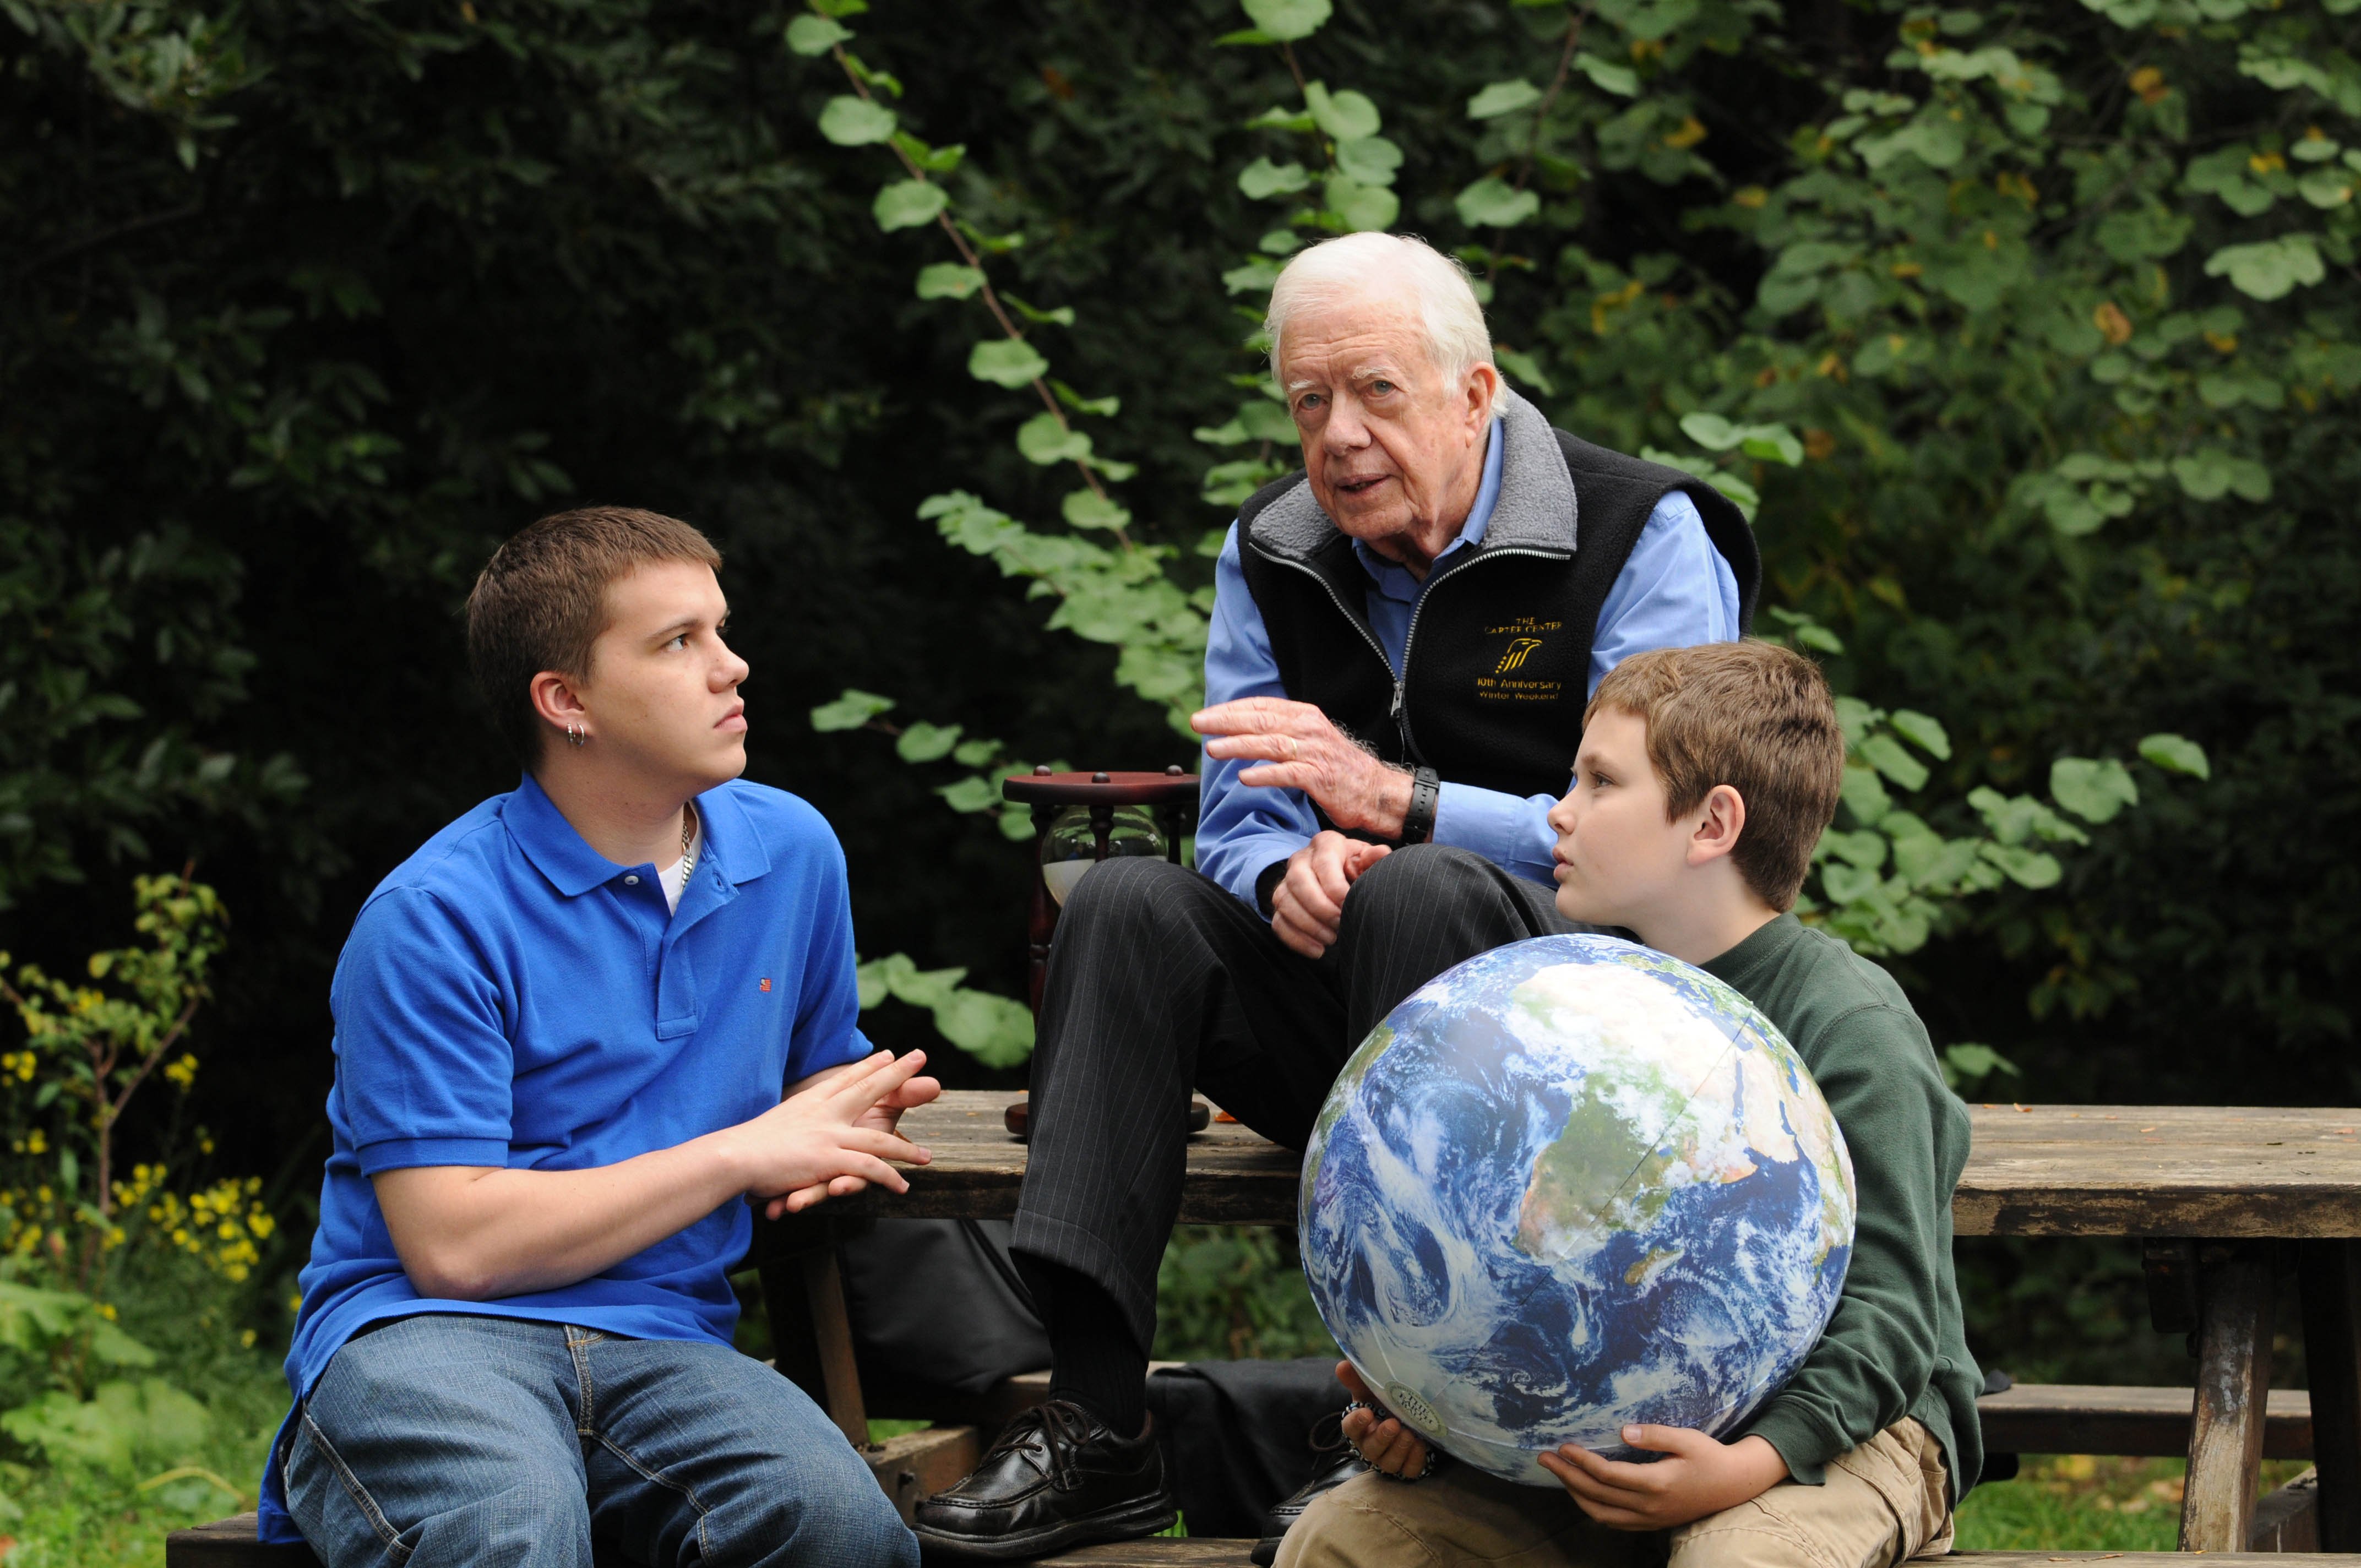 Jimmy Carter with his grandsons Jeremy Carter and Hugo Wentzel during a picnic event on October 31, 2009, in Istanbul, Turkey. | Source: Getty Images